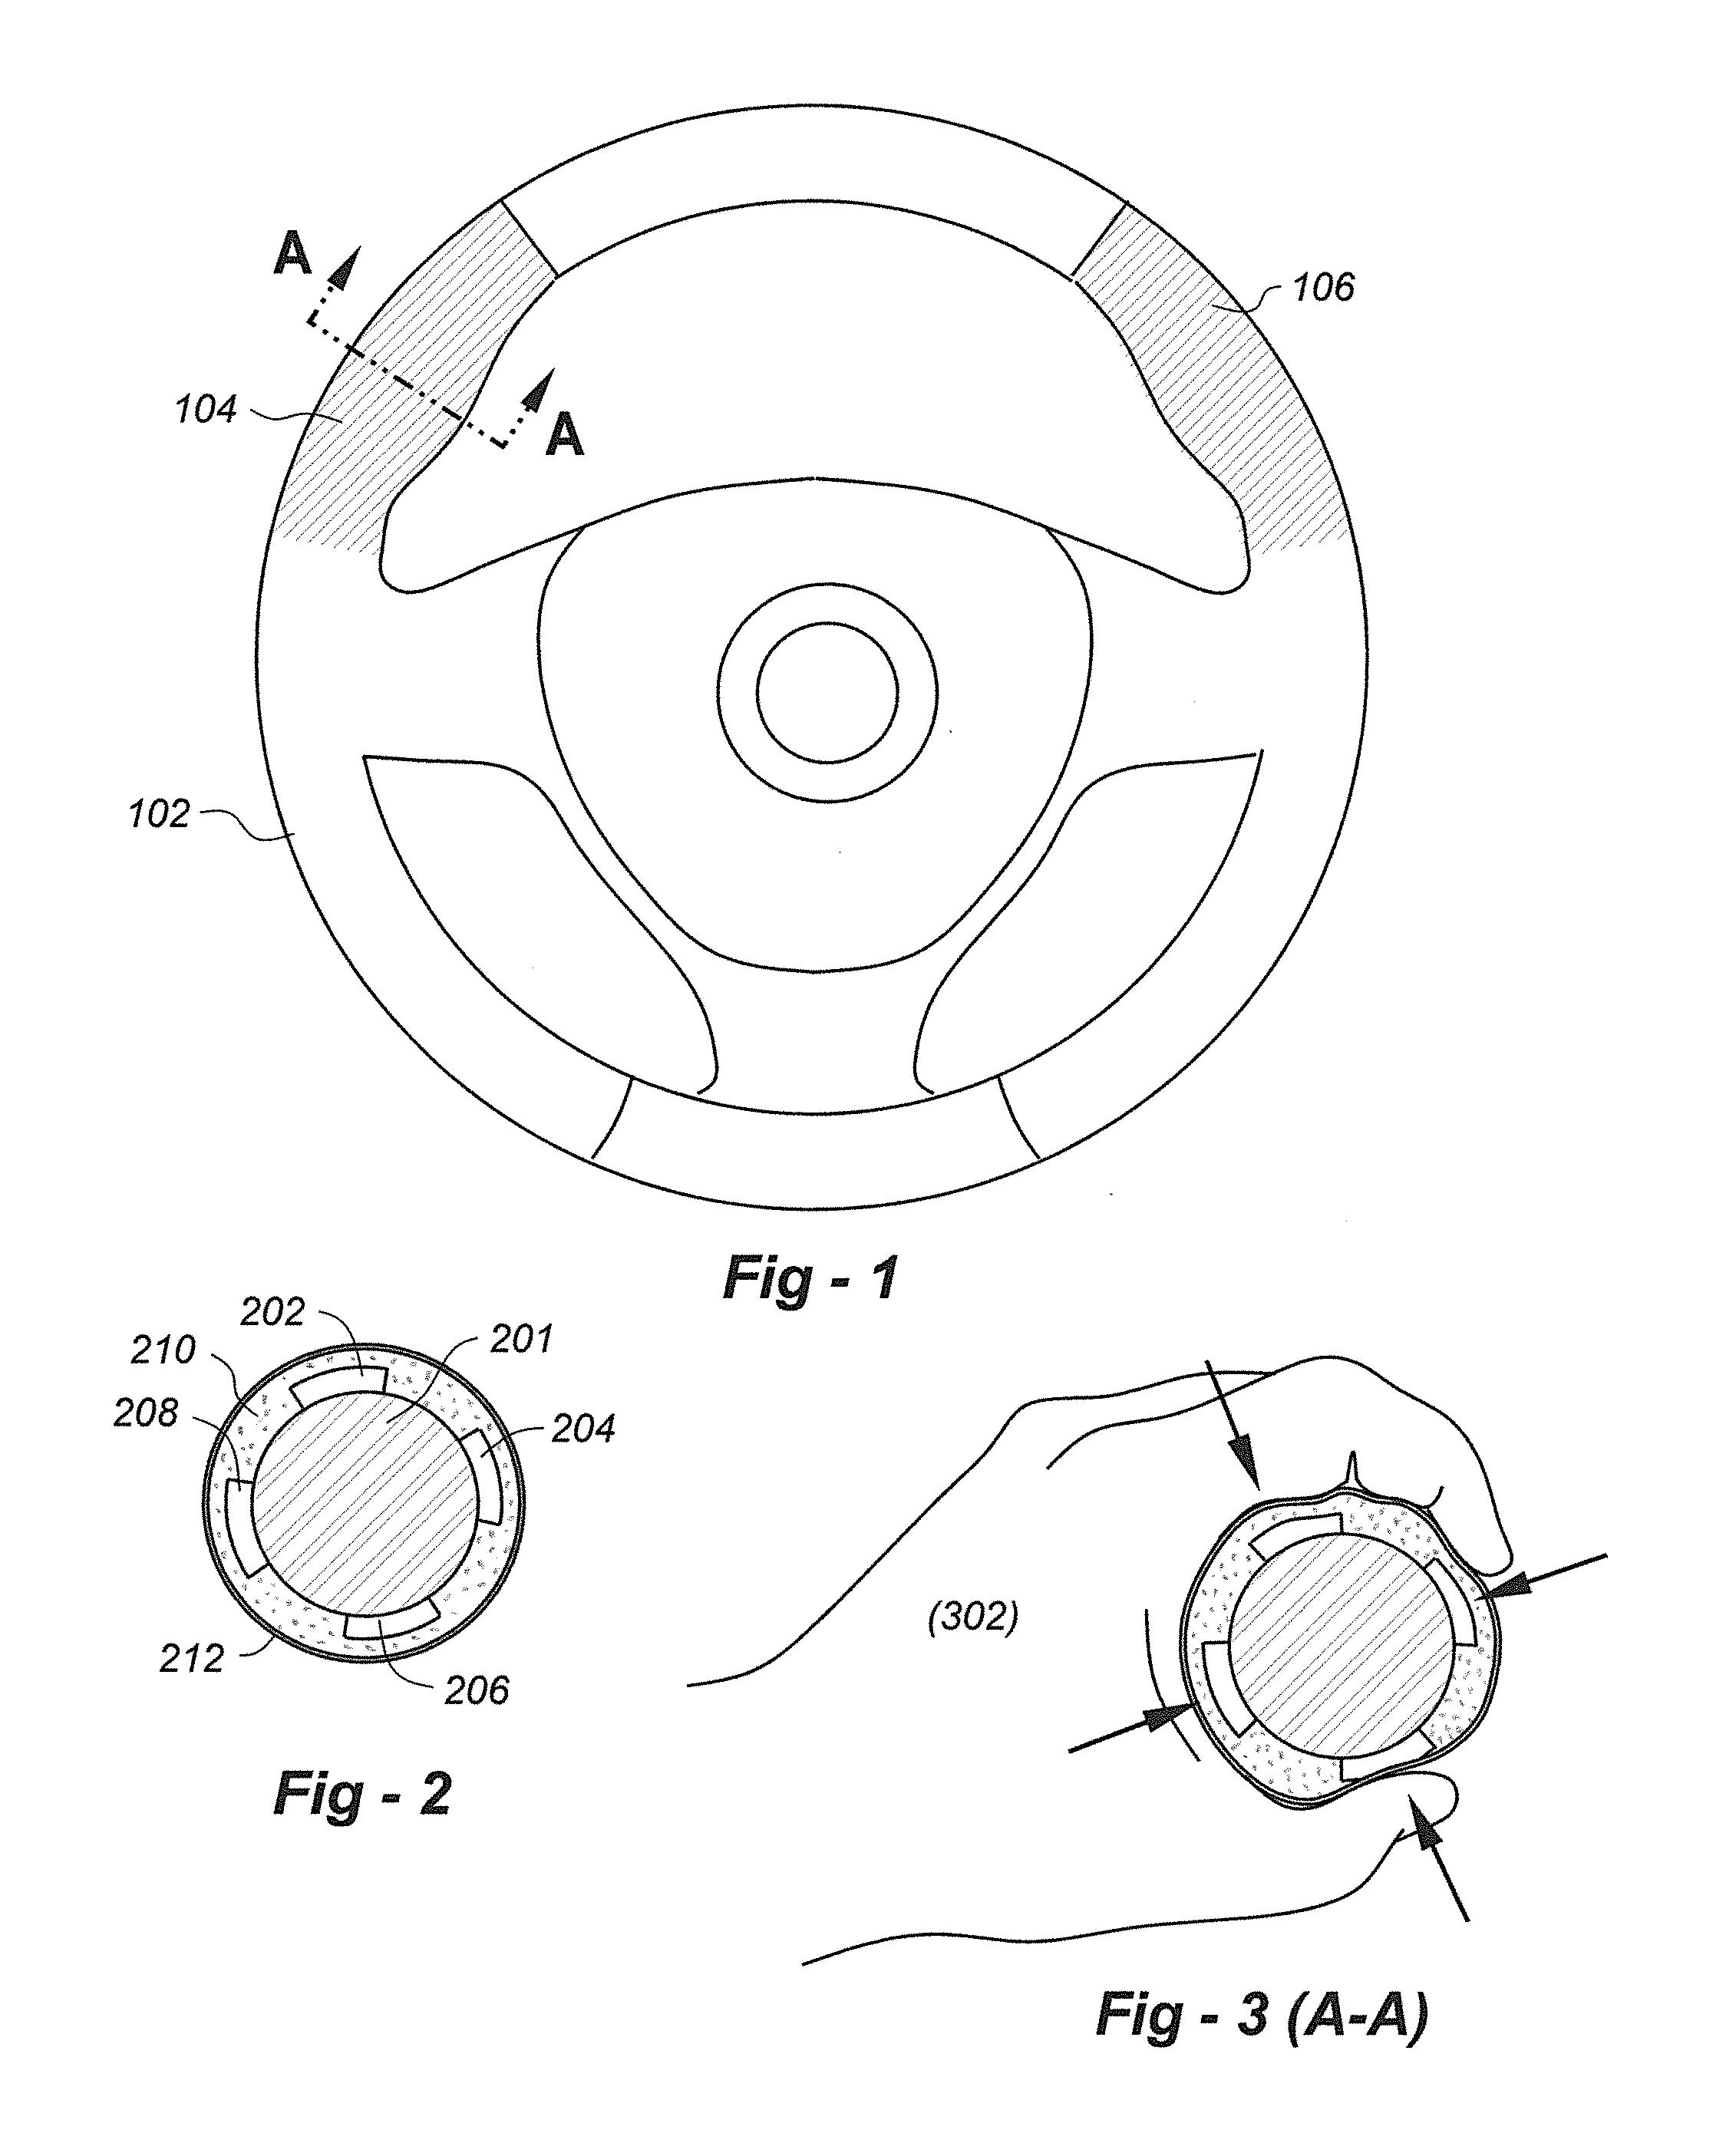 Steering wheel squeeze-activated vehicle braking system